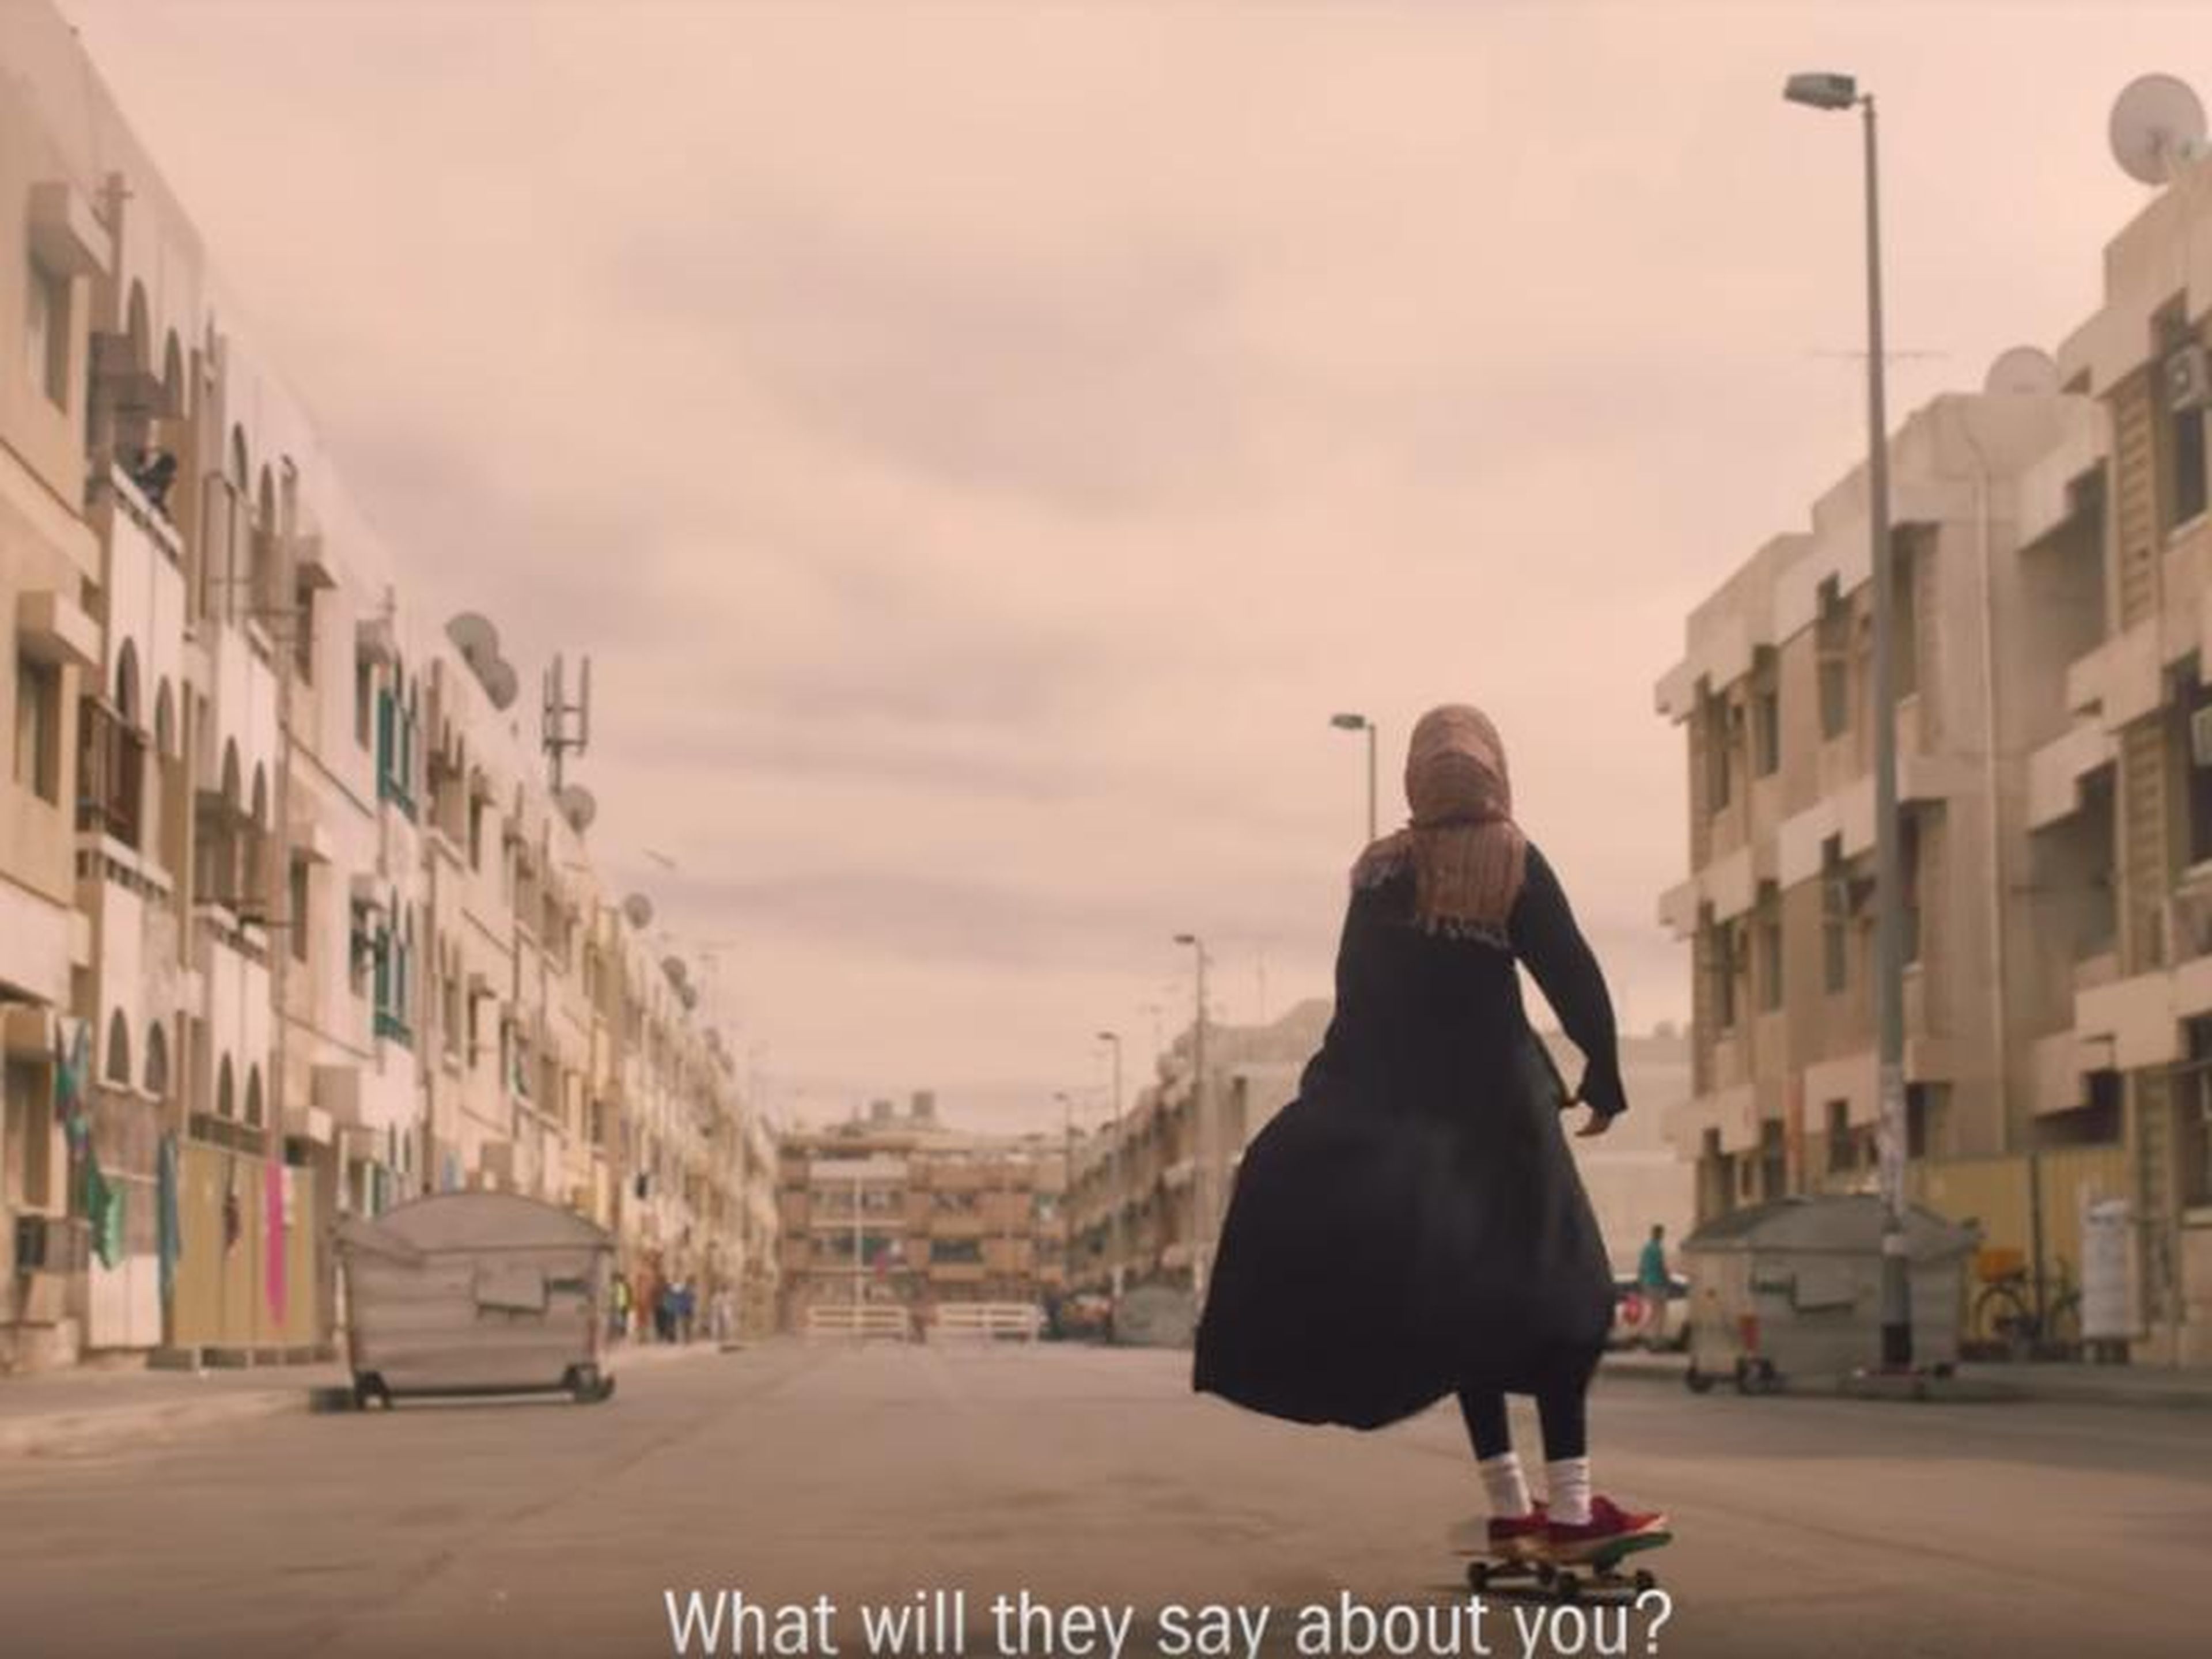 Nike also released the "What Will They Say About You?" ad in 2017, which featured five Middle Eastern women pushing social norms to succeed in sports like boxing and skateboarding.